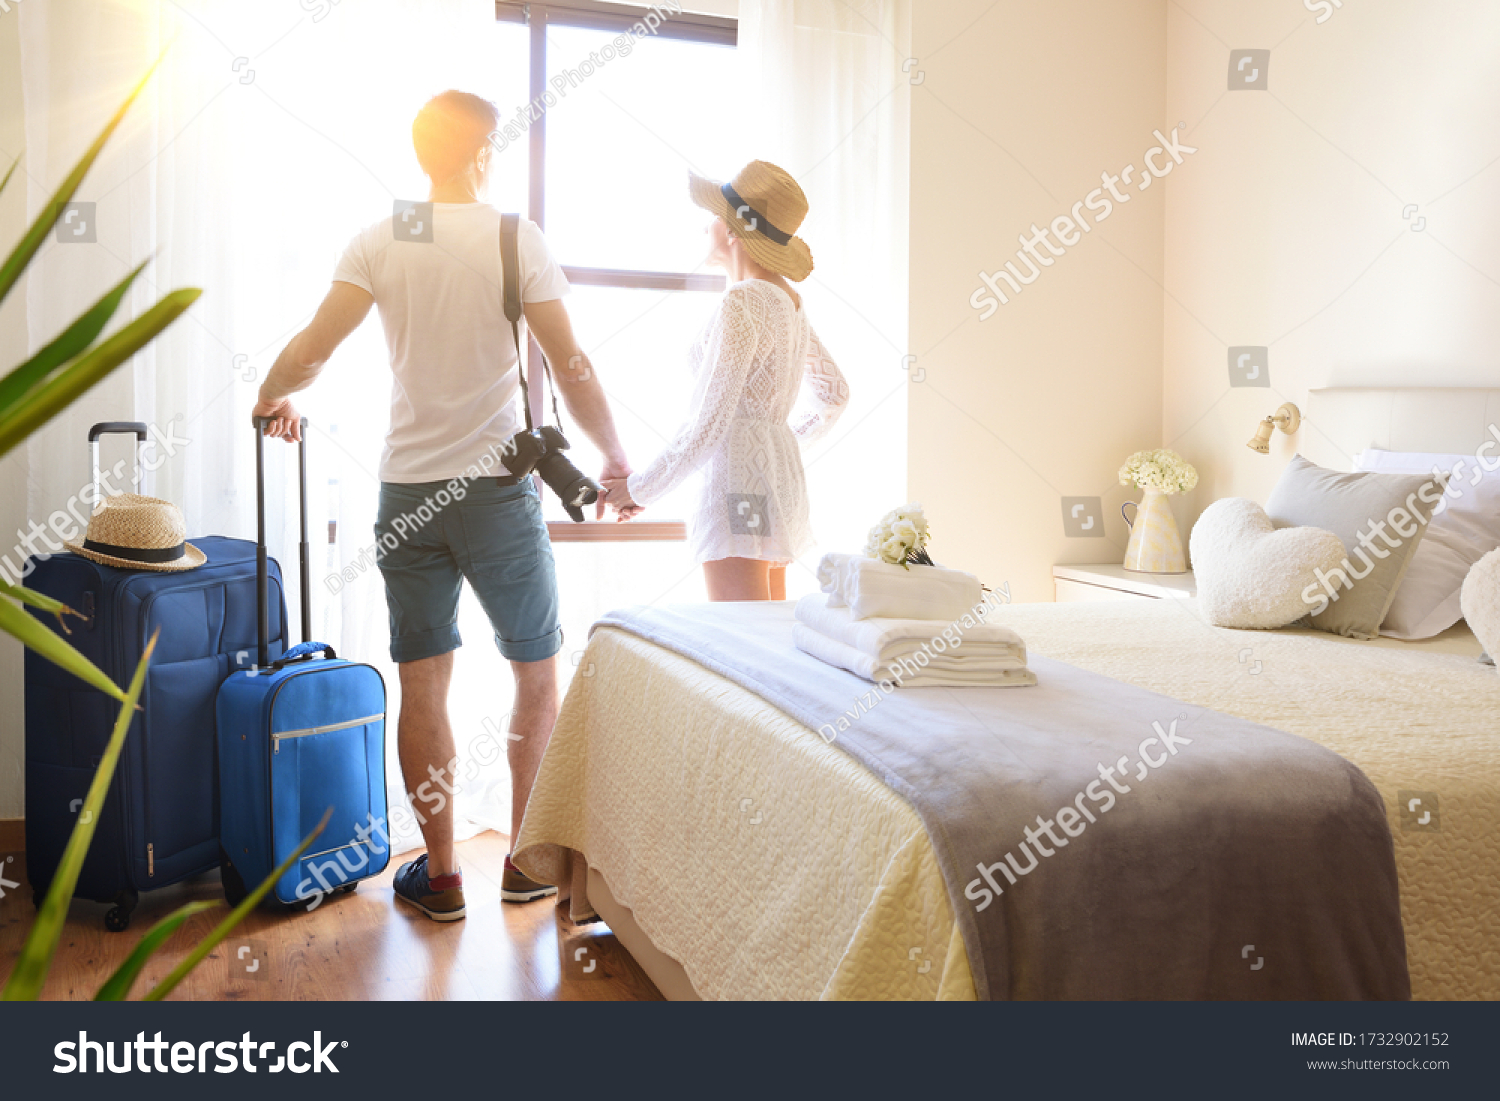 Couple on vacation with suitcases holding hands on their backs looking out a window in a bright hotel room. #1732902152